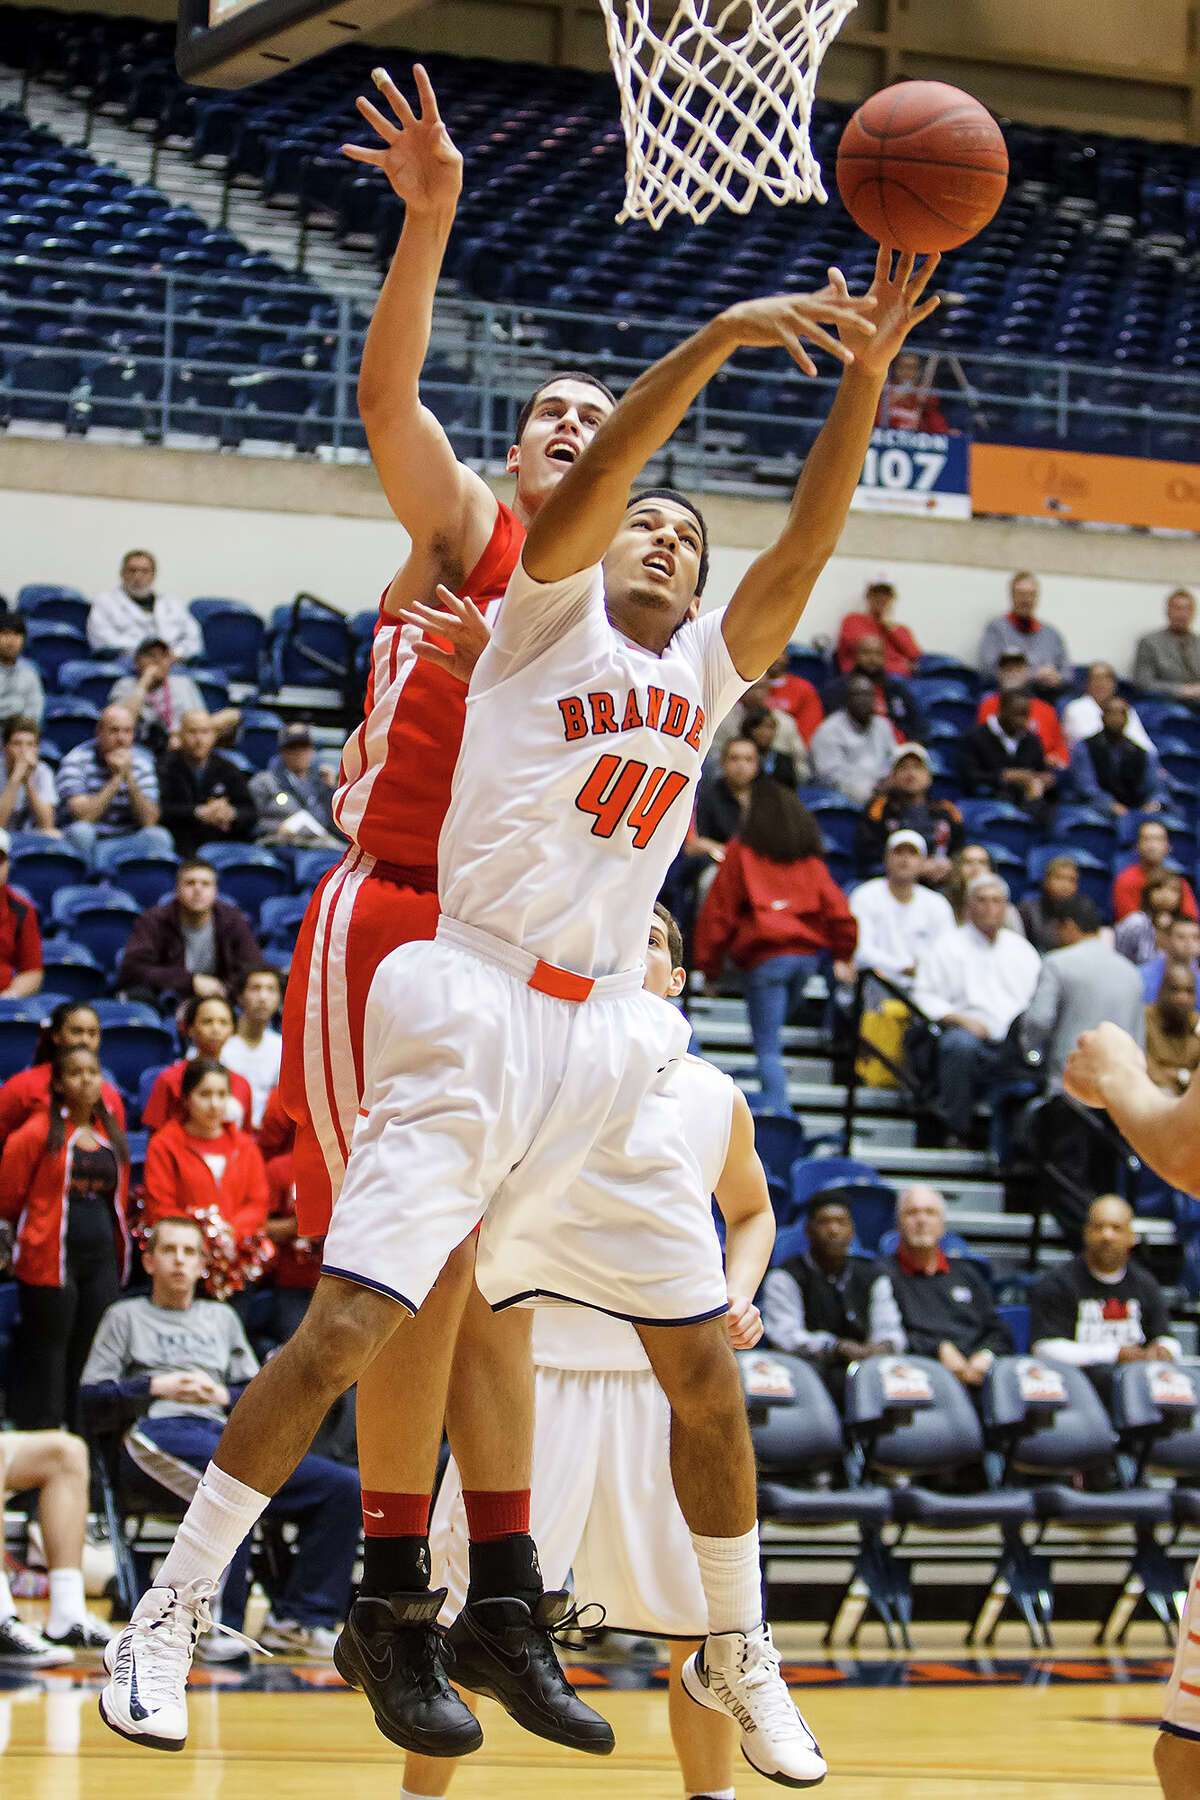 Brandeis' Jonathan Robinson (right) battles Judson's David Wacker for a rebound during the first half of their Class 5A boys basketball third round game at the UTSA Convocation Center on Tuesday, Feb. 26, 2013. Brandeis won the game 60-53.